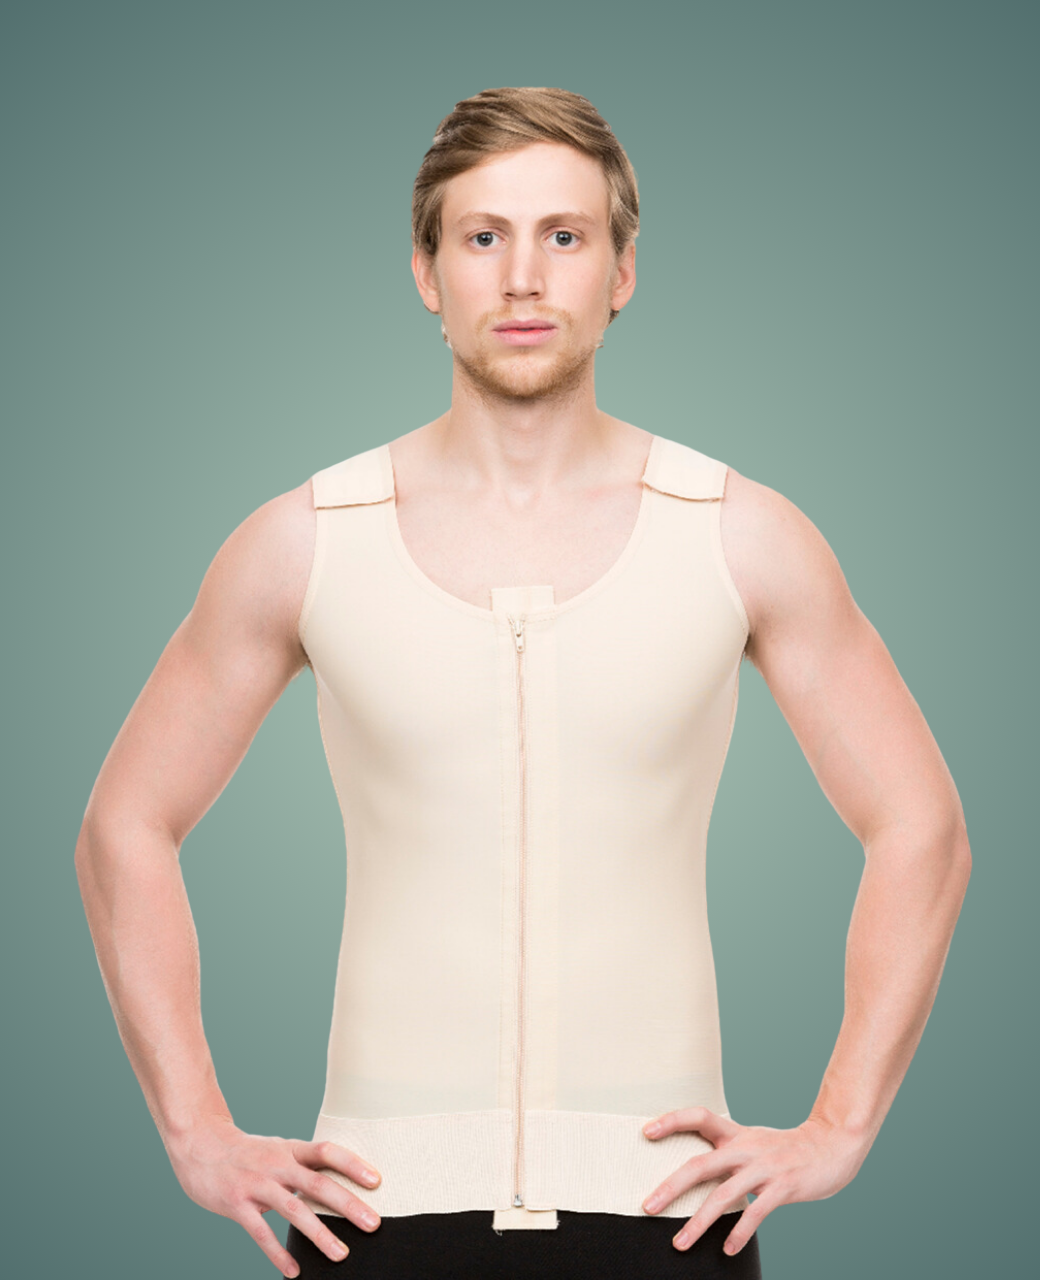 MG02 - Masc. Body Suit, Mid Thigh Length